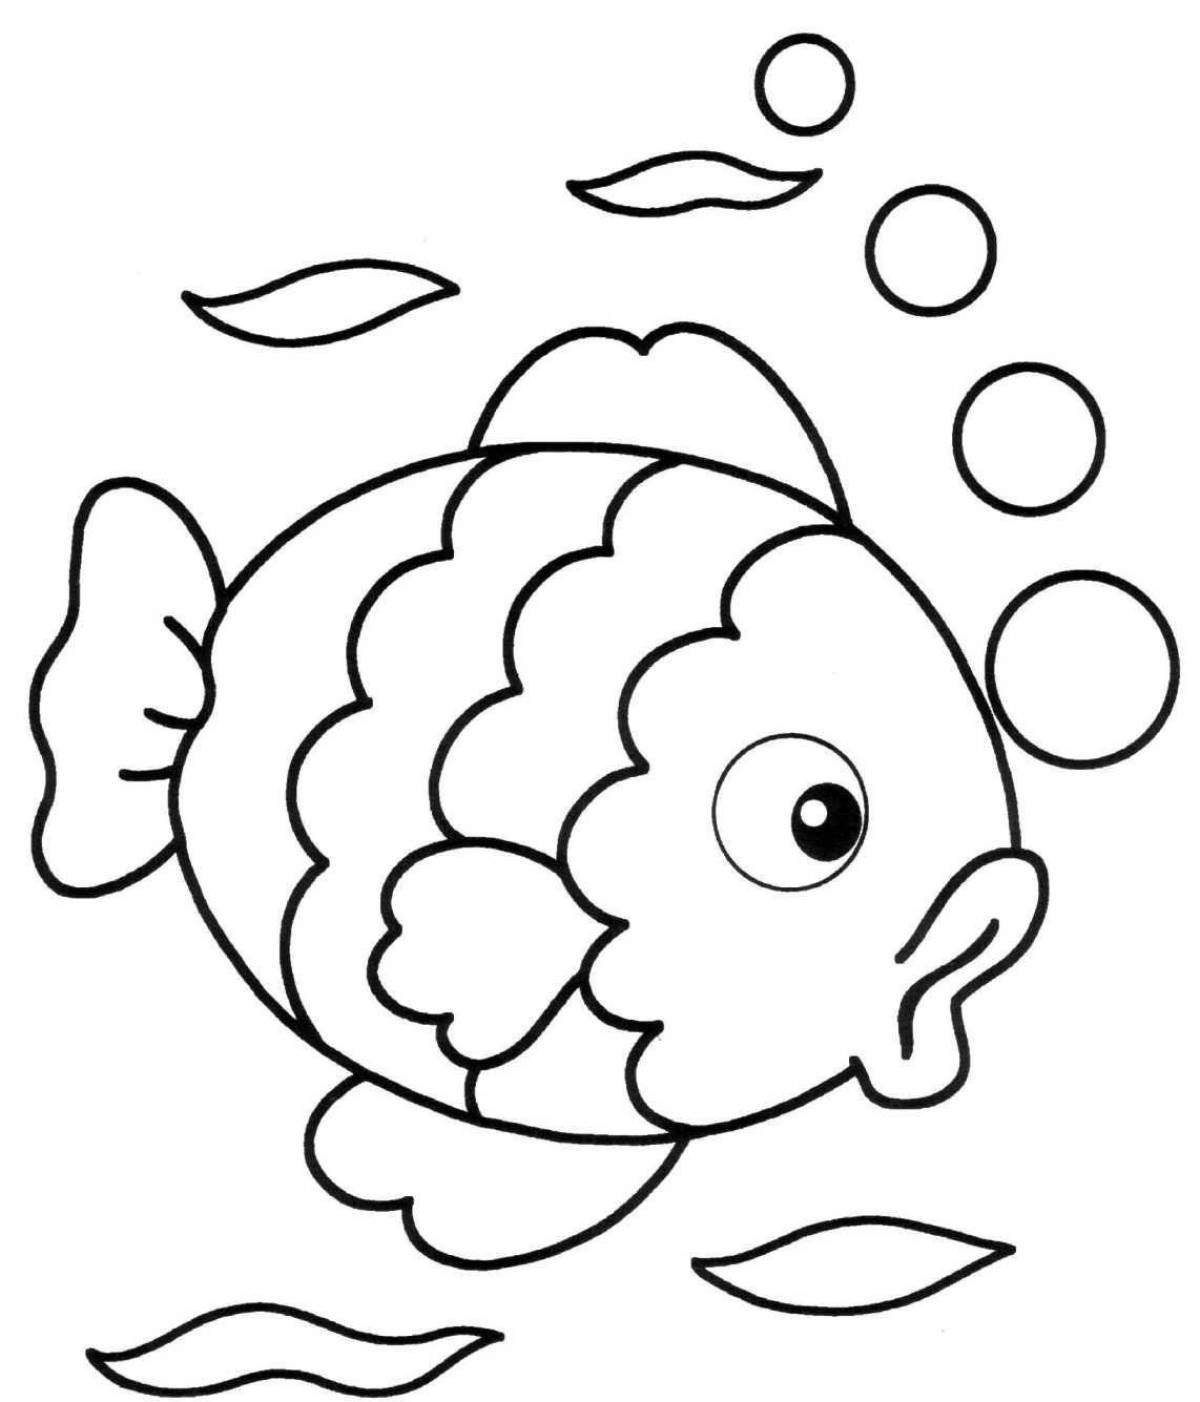 Creative coloring book for children 3 4